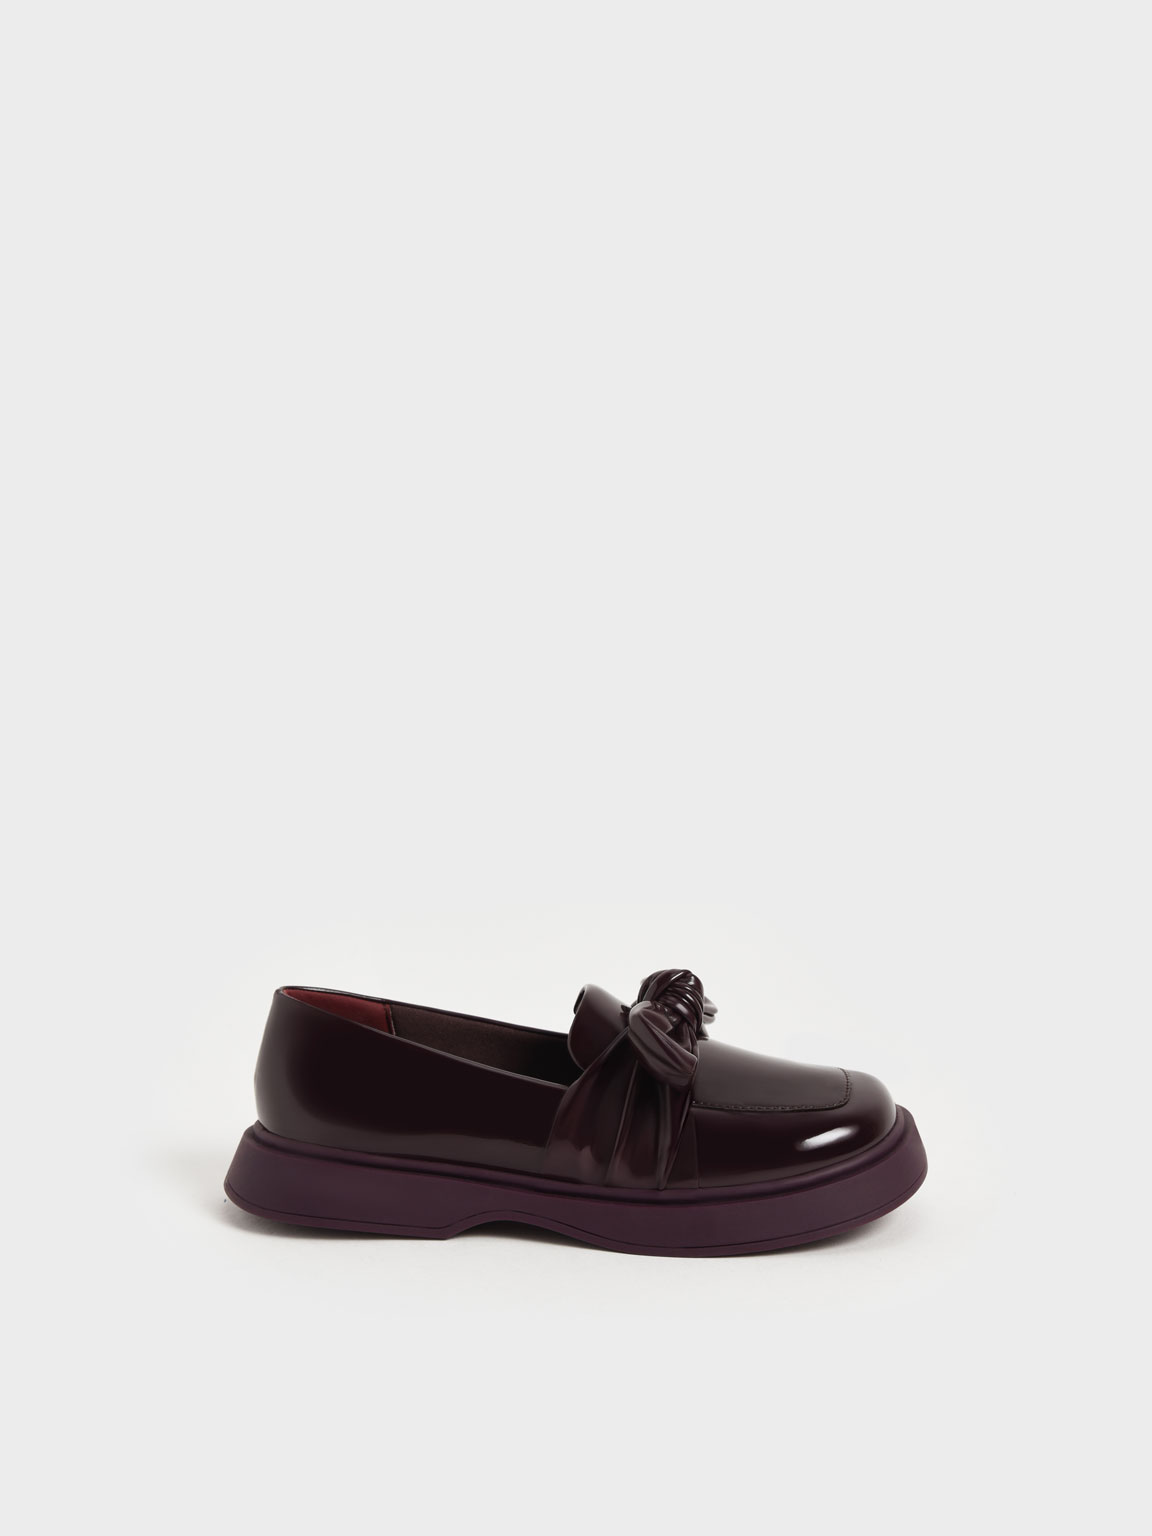 Girls’ Patent Bow Loafers